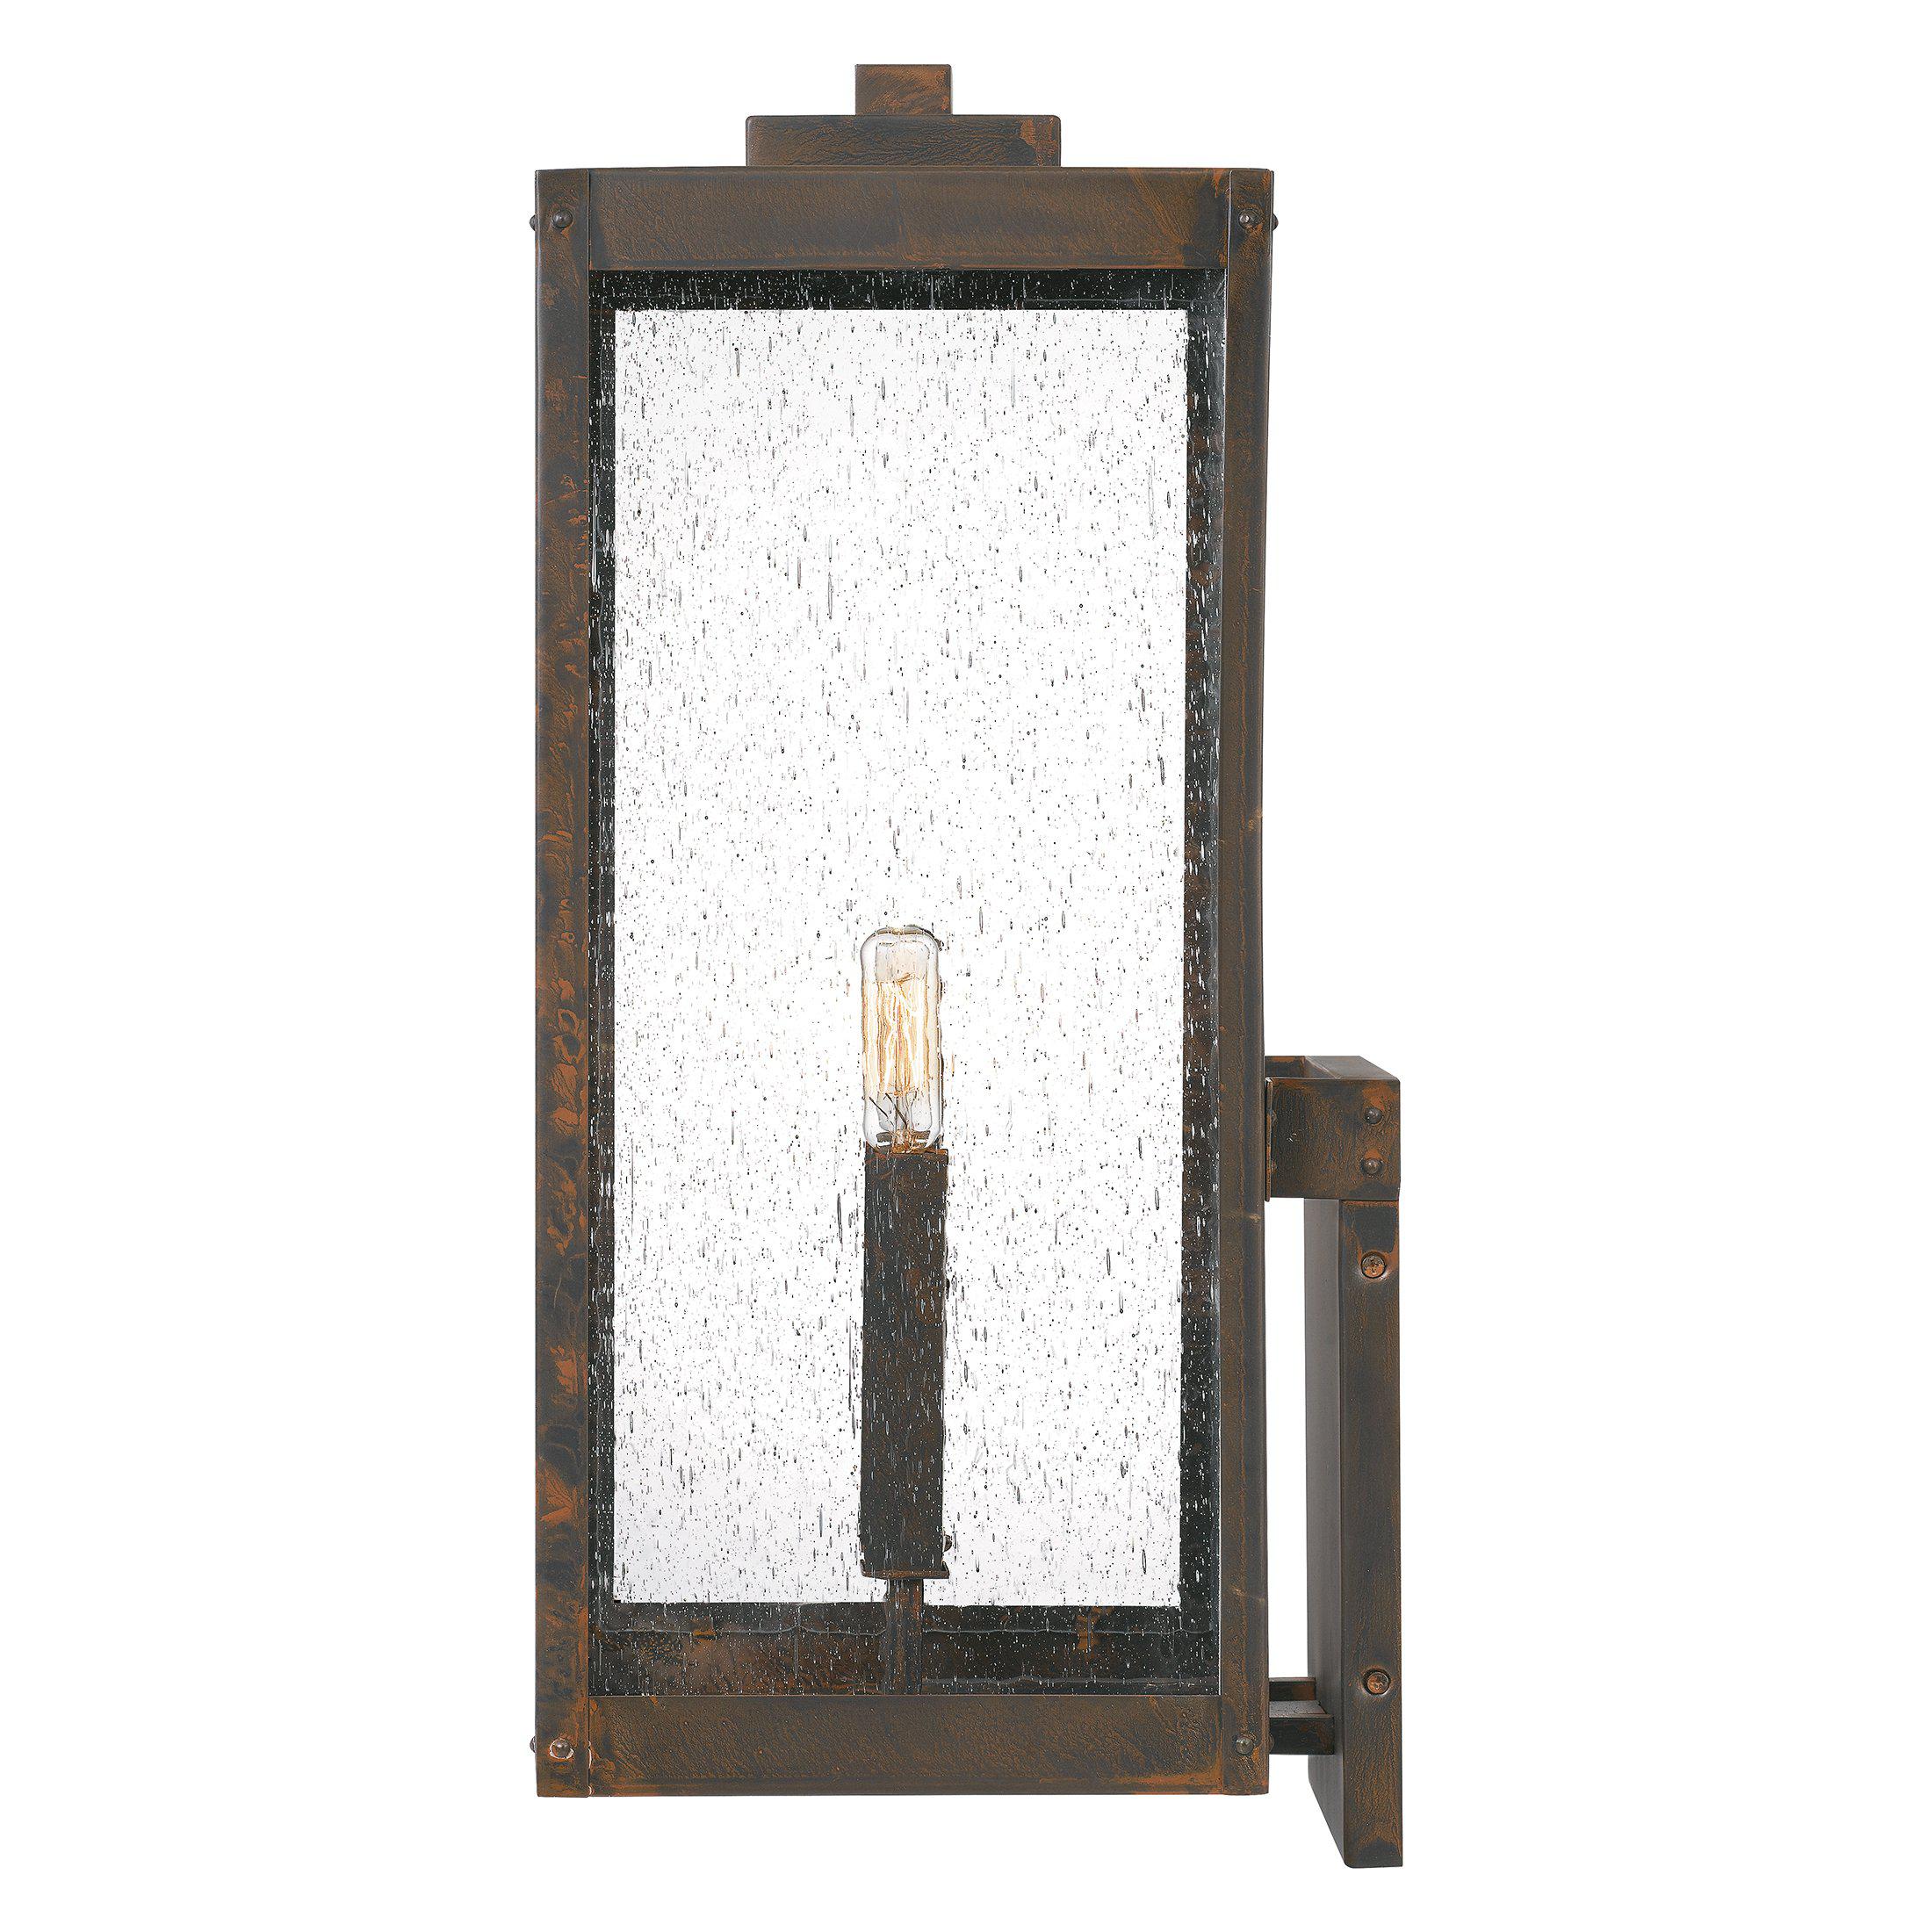 Quoizel  Westover Outdoor Lantern, XL Outdoor l Wall Quoizel   